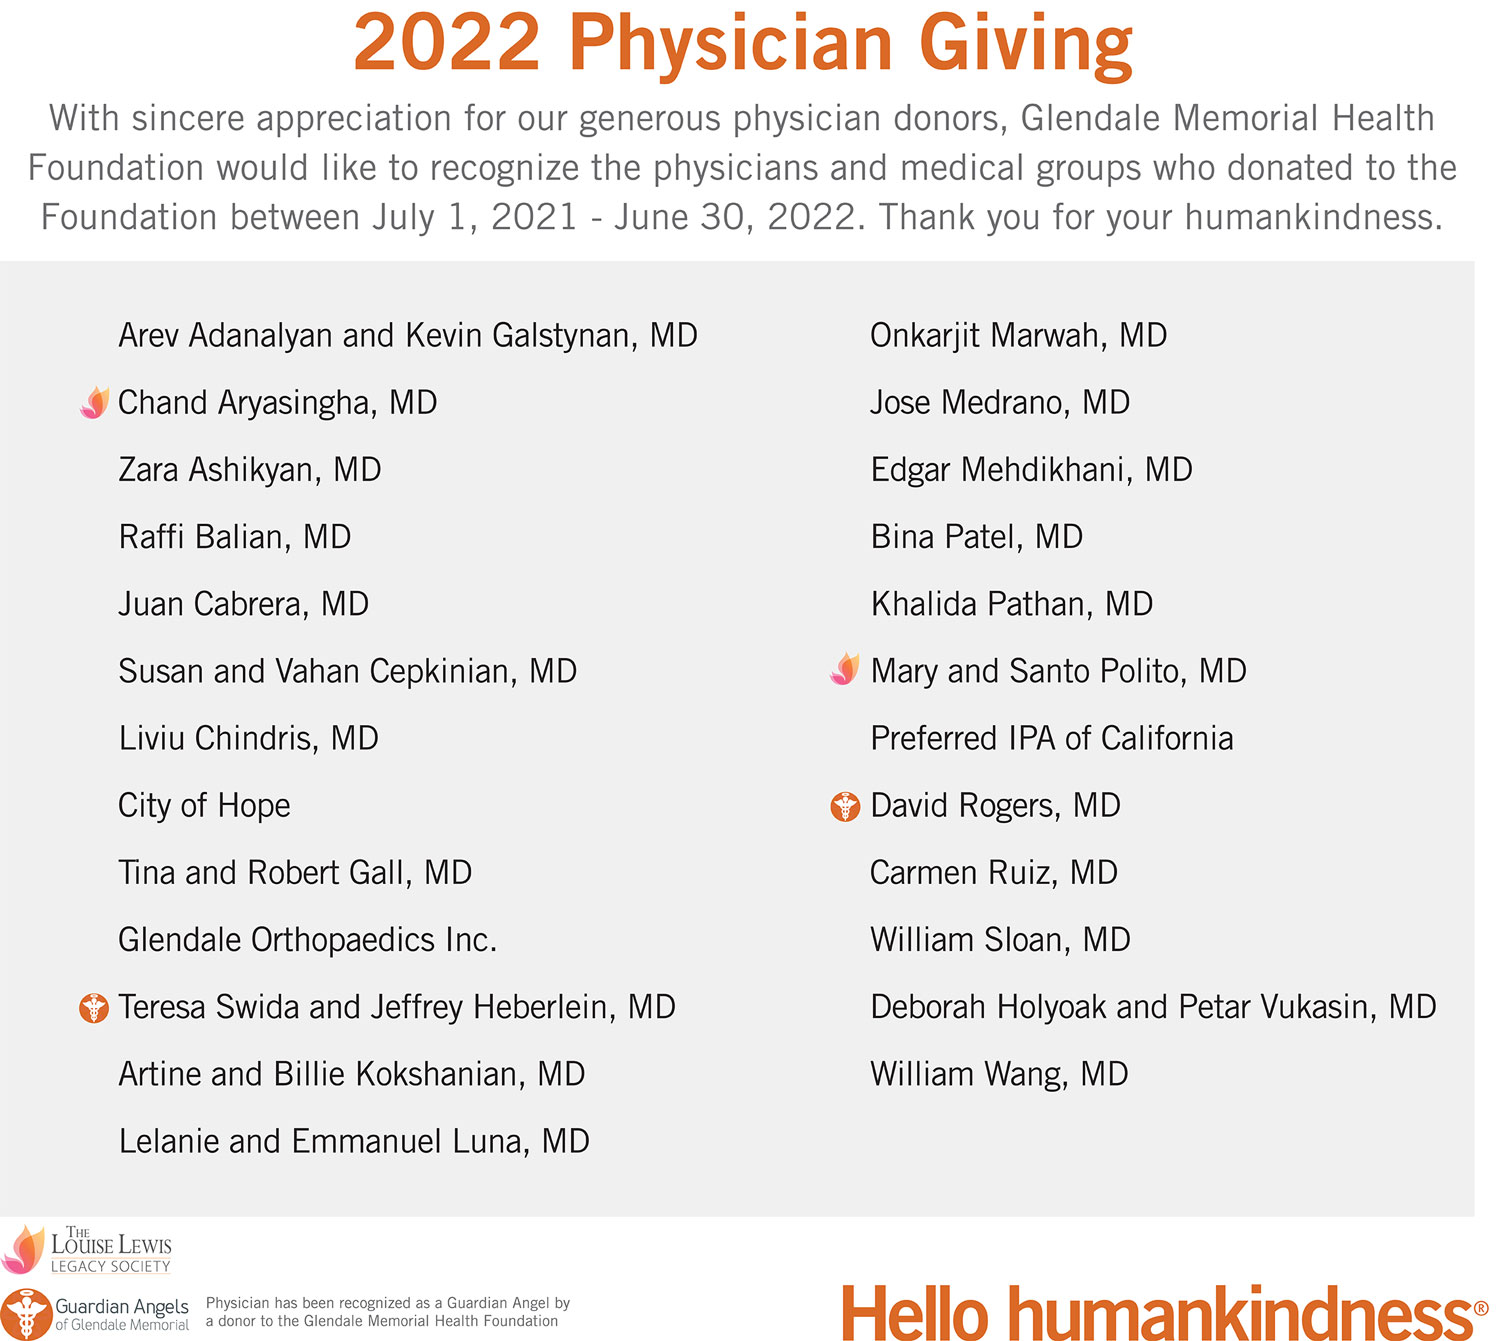 Physician Giving 2022 - List of Names